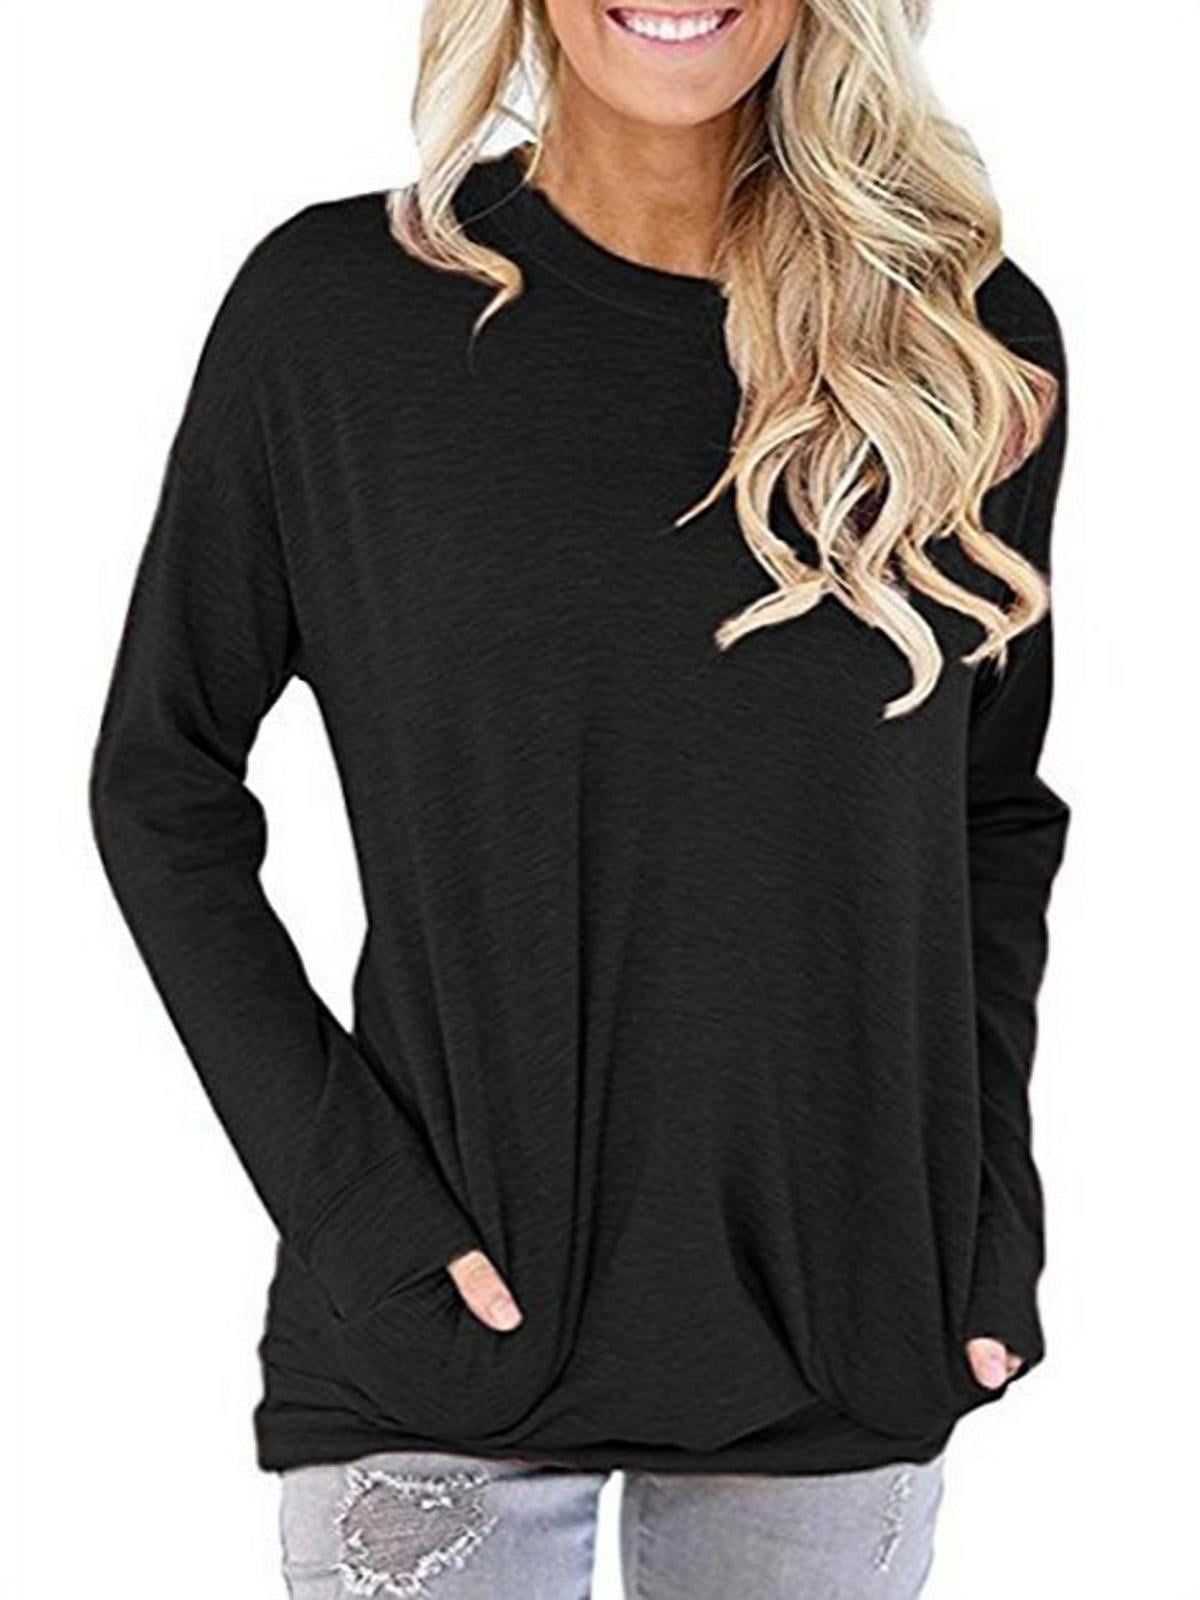 Gofodn Tops for Women Pullover Sweatshirt Ladies Tops Casual Classic Solid O Neck Loose Kink Long Sleeve Shirts Blouse 